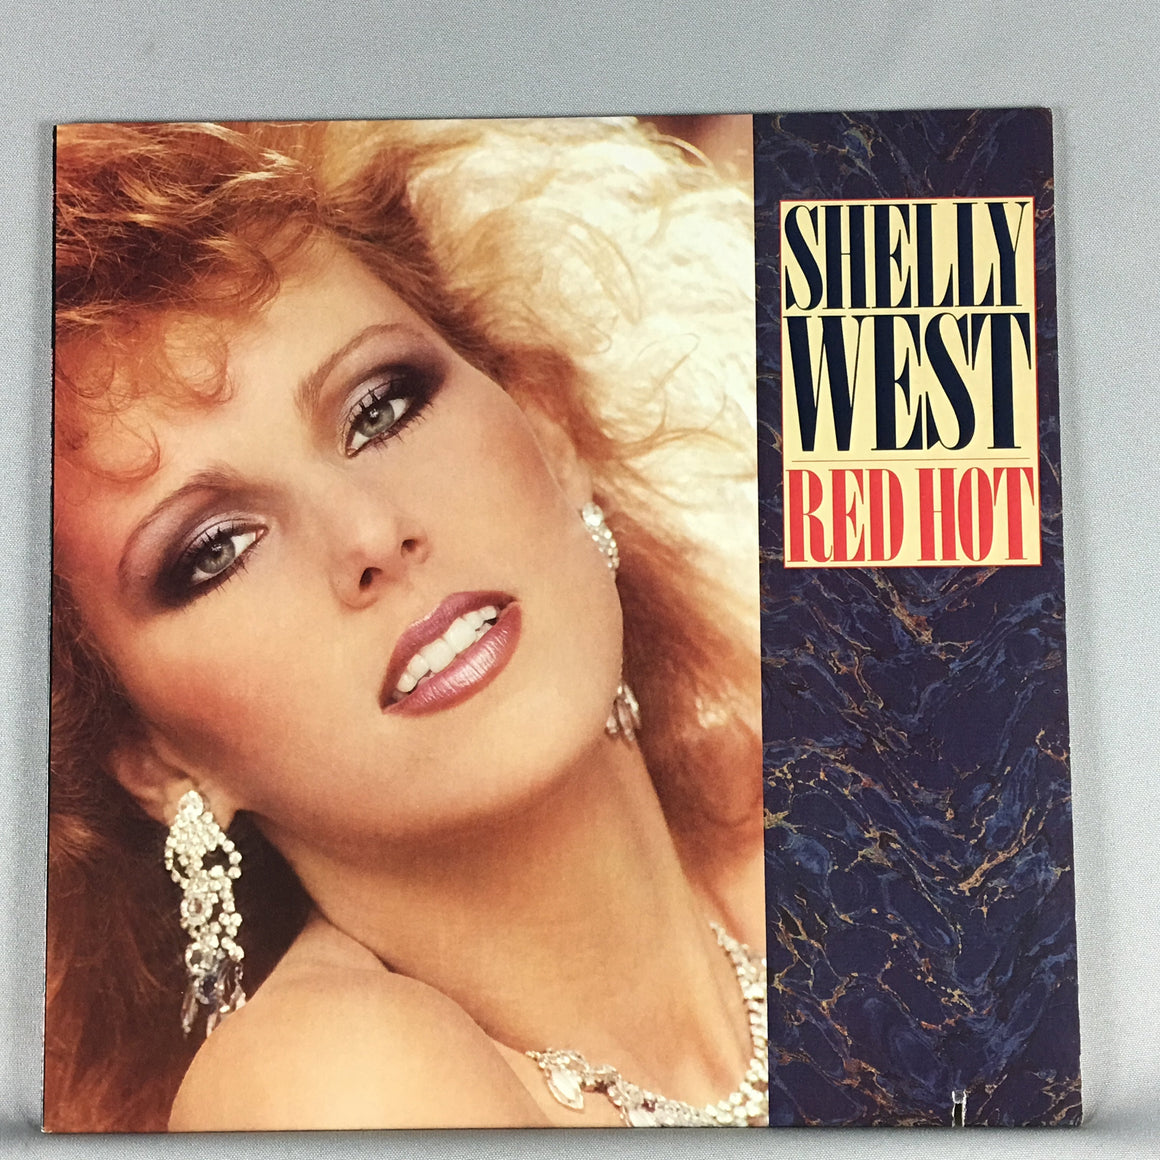 Shelly West ‎ Red Hot Orig Press Used Vinyl LP VG+\VG+